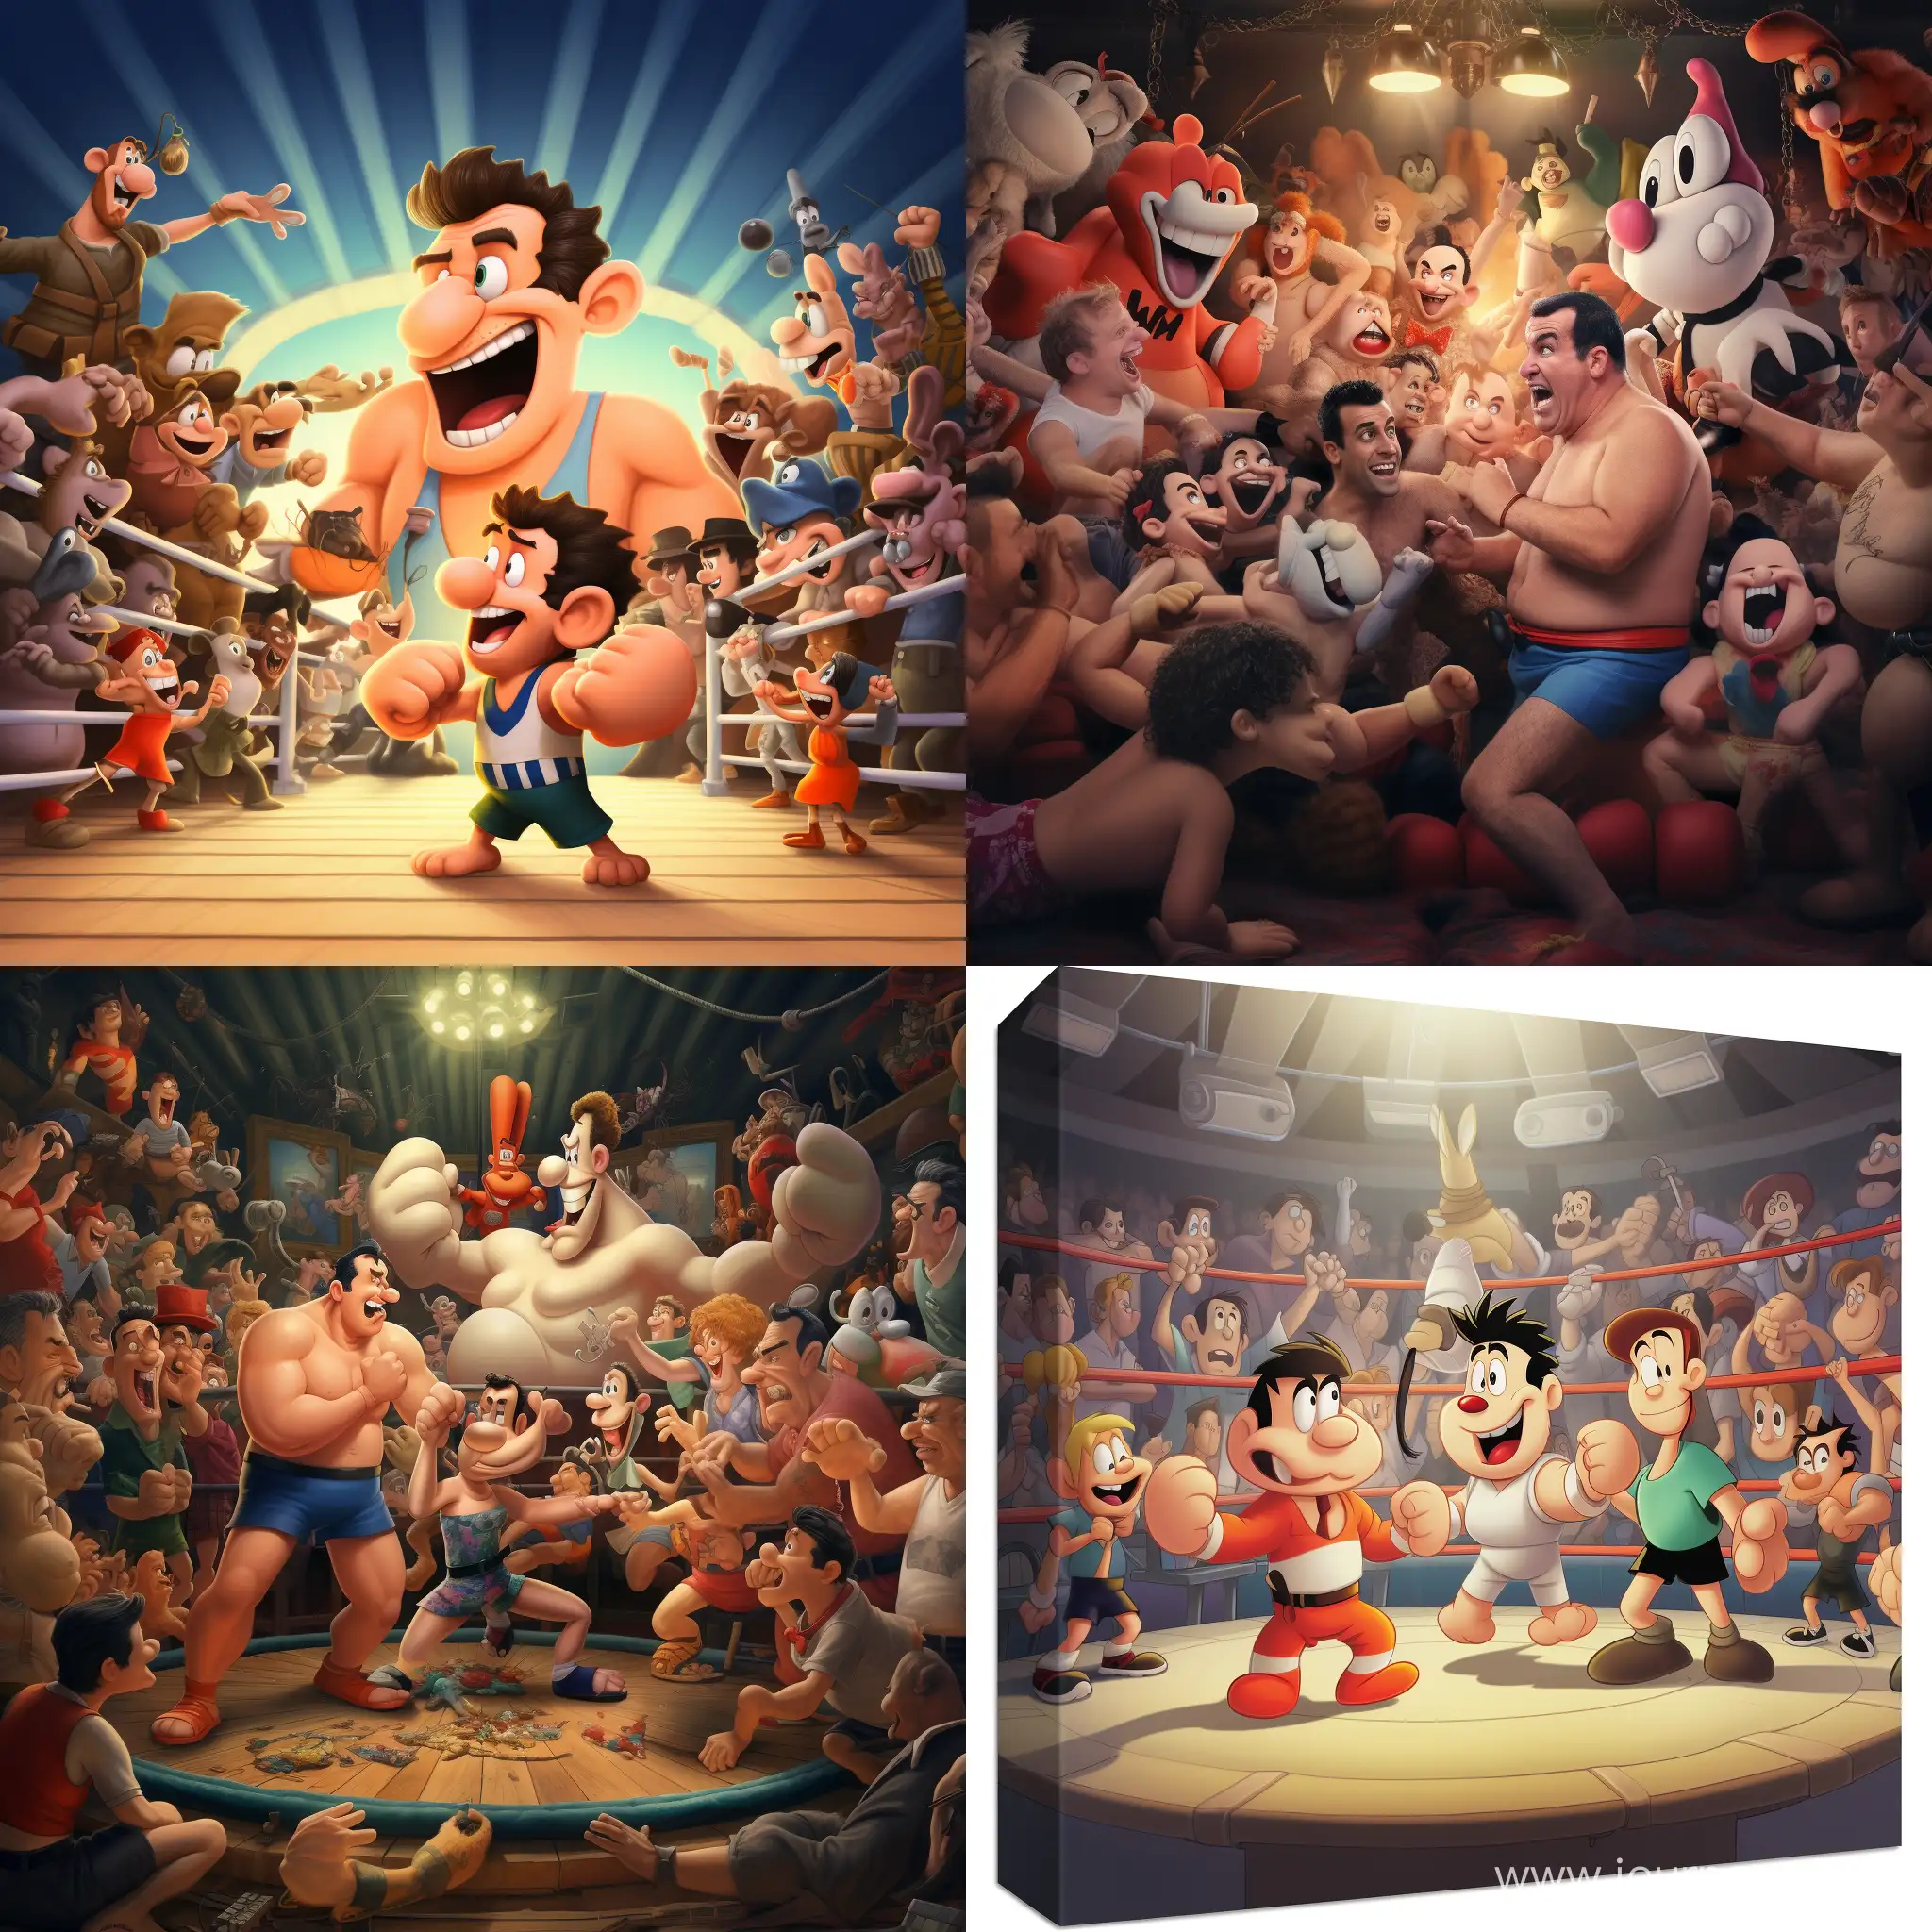 Epic-Cartoon-Boxing-Match-Fred-Flintstone-vs-Bugs-Bunny-with-a-StarStudded-Audience